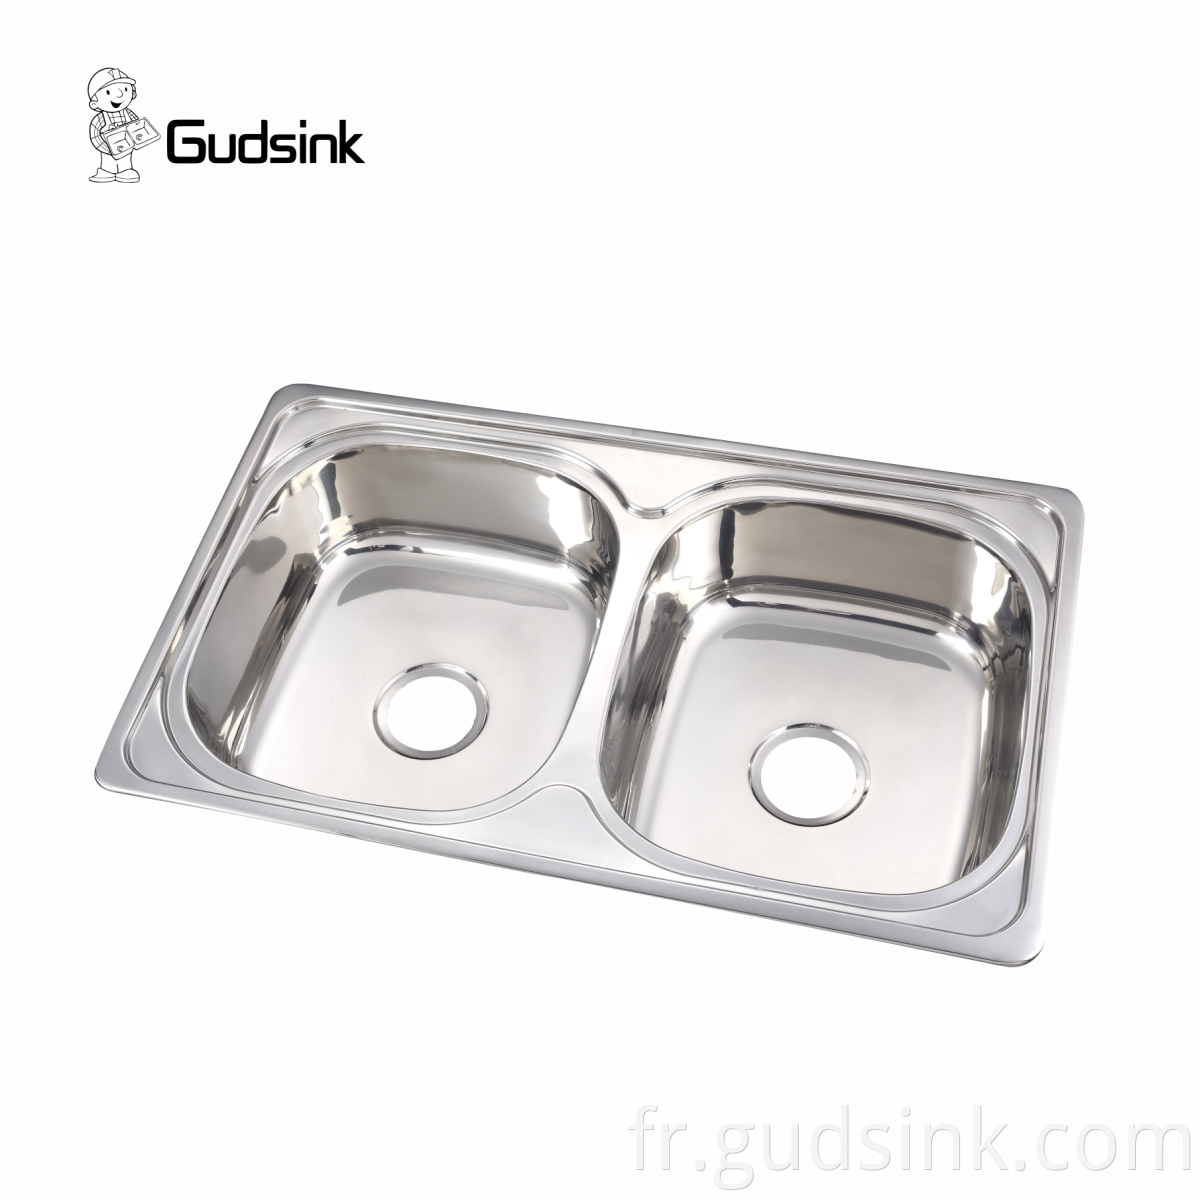 stainless steel sink with legs